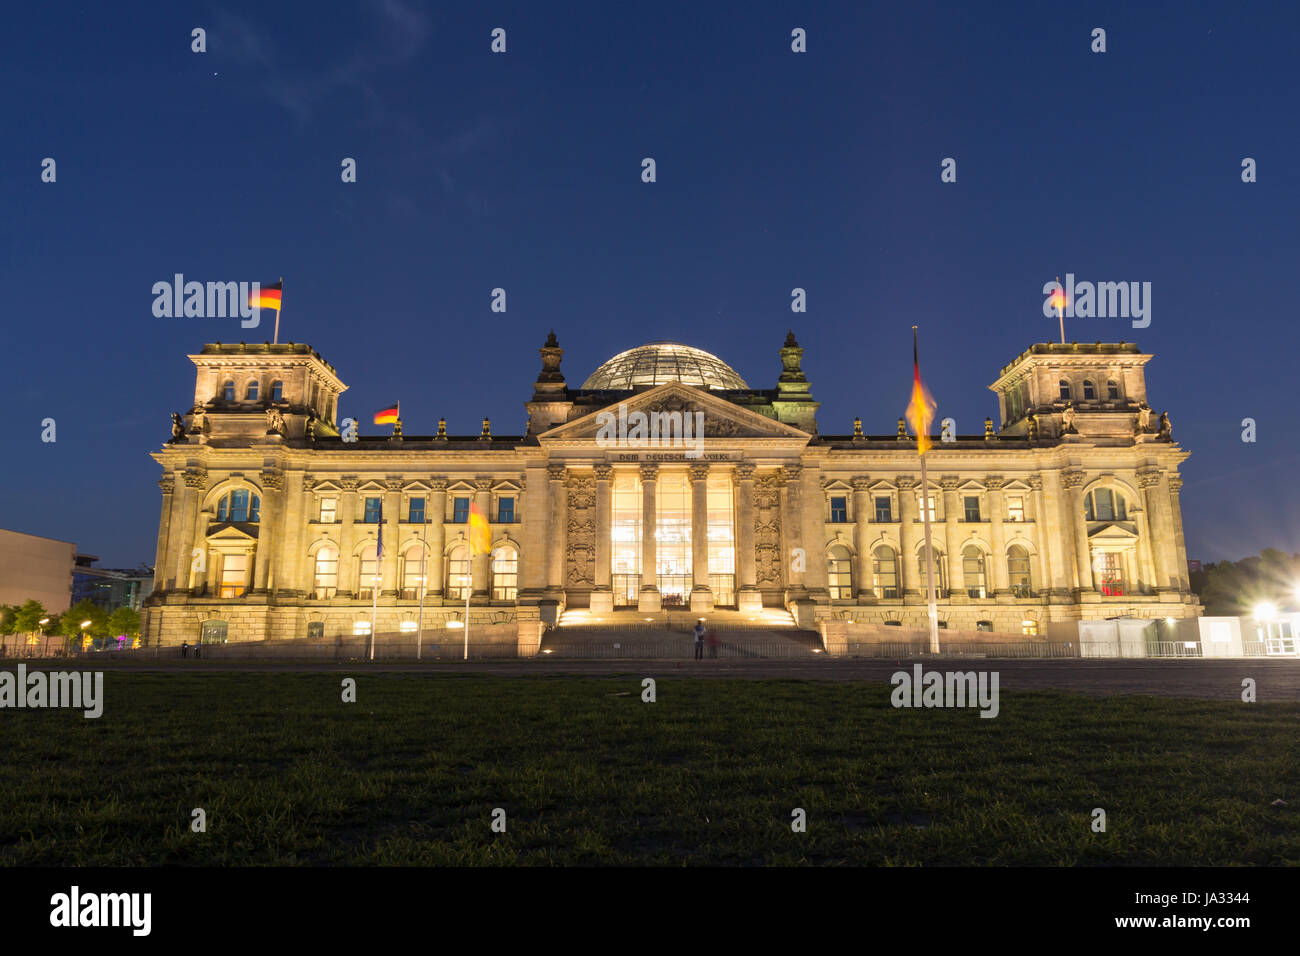 The German Bundestag, a constitutional and legislative building in Berlin, capital of Germany Stock Photo